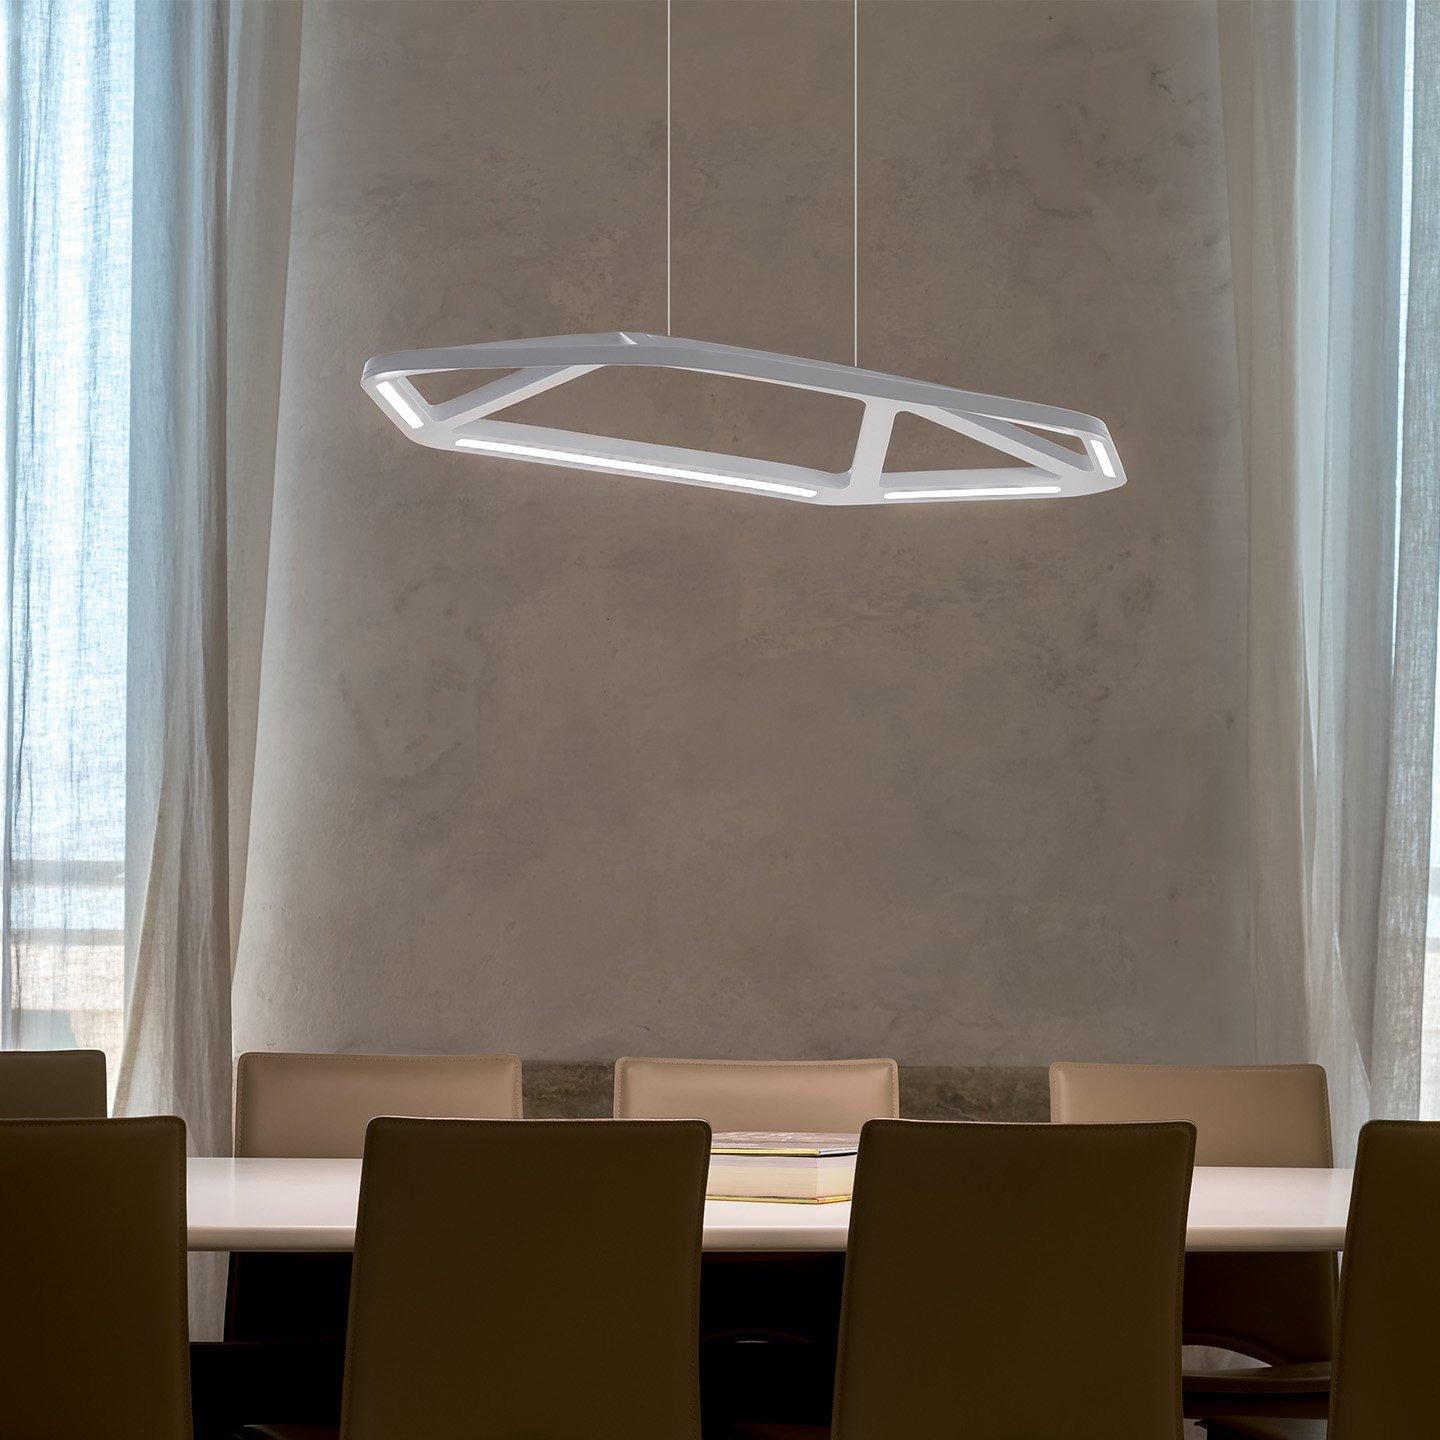 Aki, designed by Studio Dreimann in 2012, is a clever study of the use of new materials and forms. While Aki is a stunning presence, its leaf like form and solid okume wood frame is designed to be light beyond belief. Aki is constructed of solid